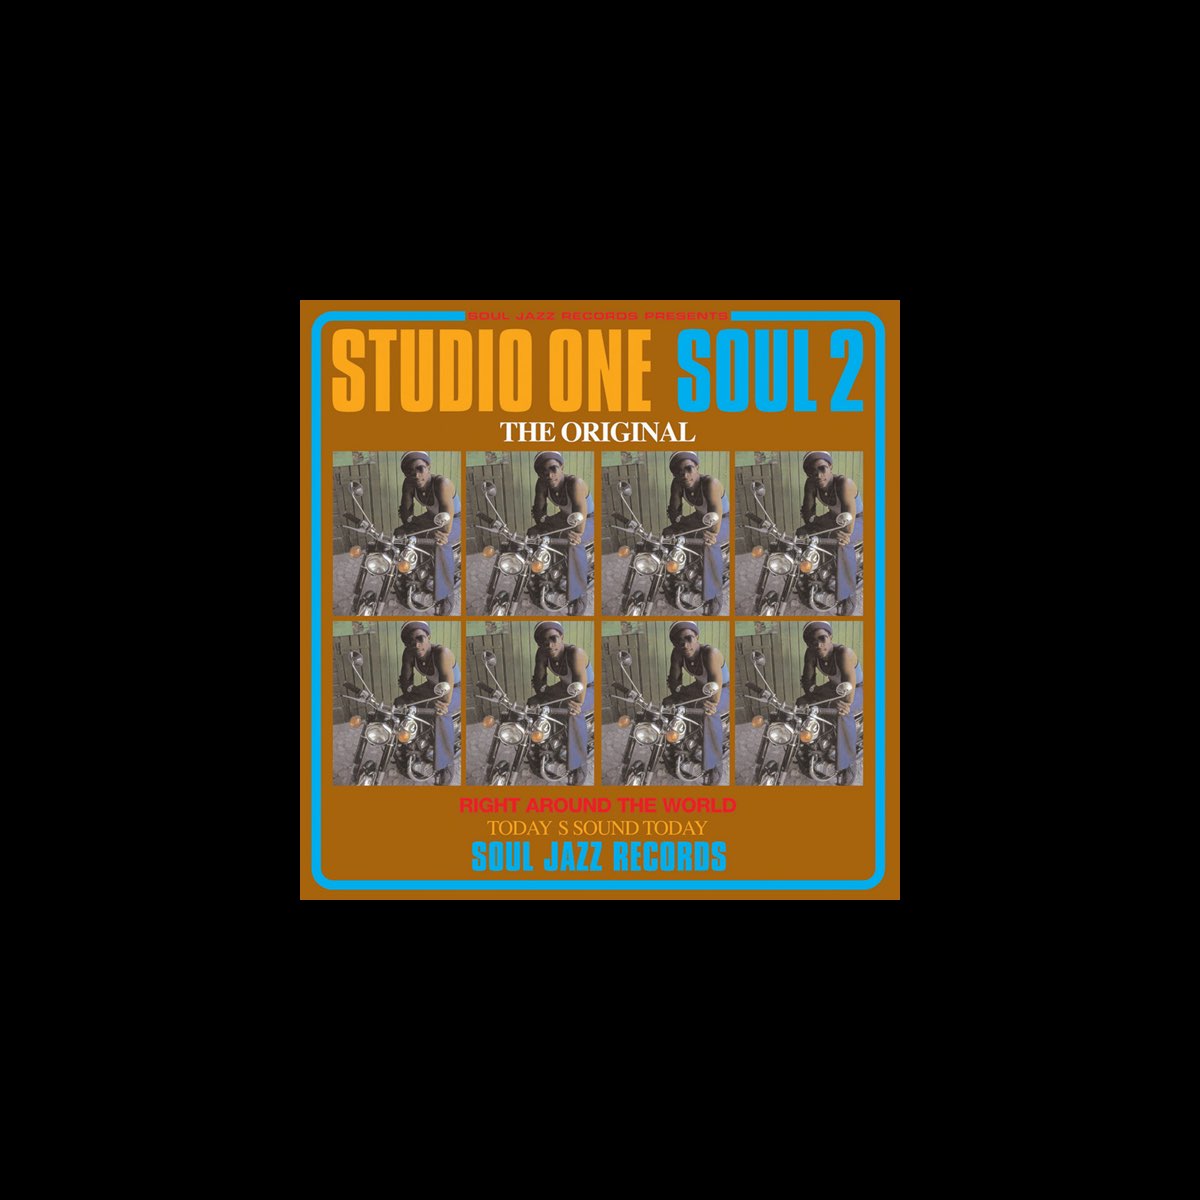 Studio One Soul 2 by Various Artists on Apple Music